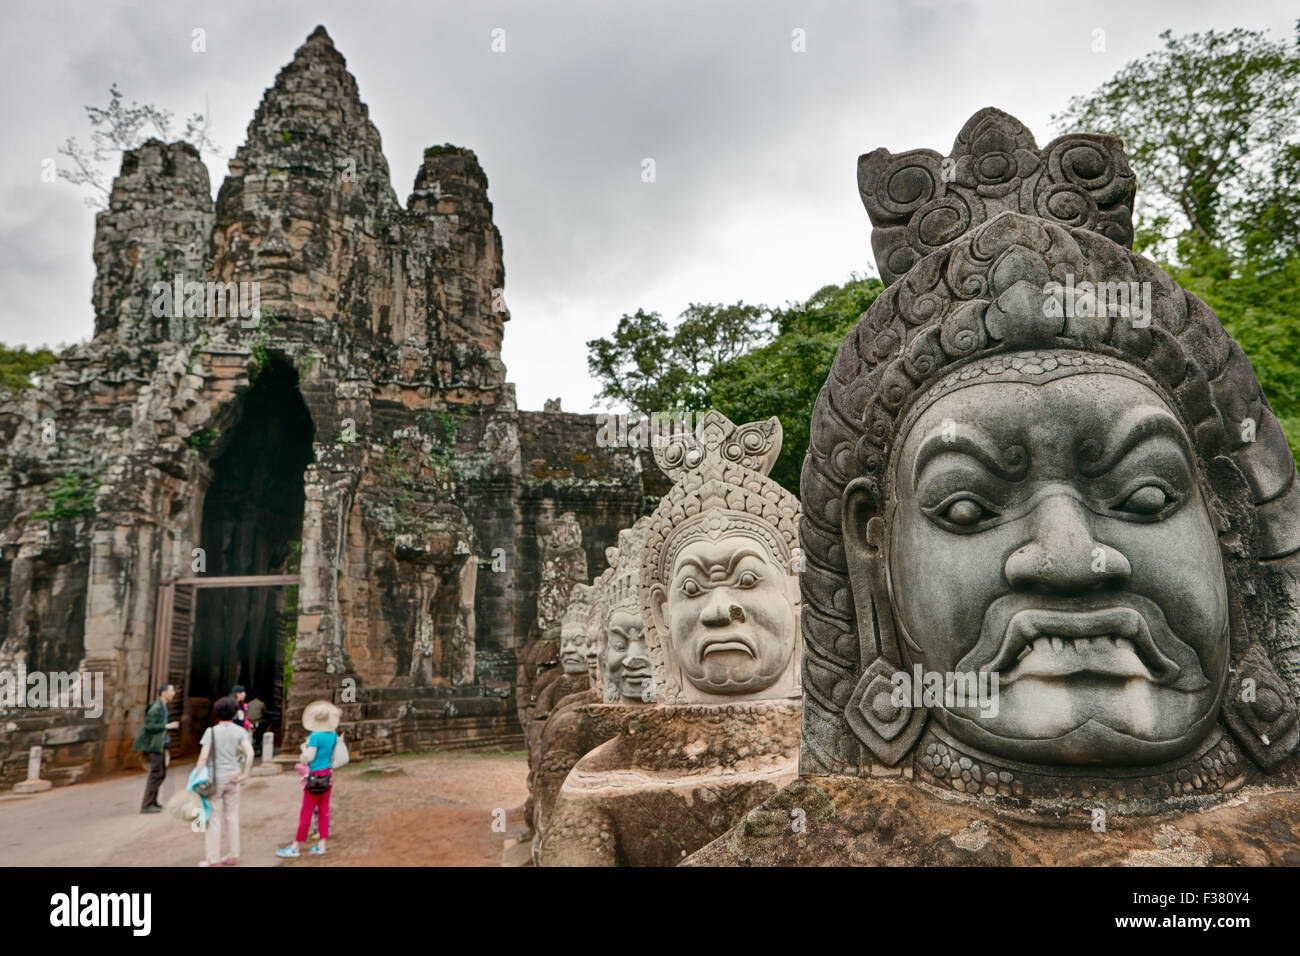 Giant carved stone faces at the South Gate of the Angkor Thom. Angkor Archaeological Park, Siem Reap Province, Cambodia. Stock Photo